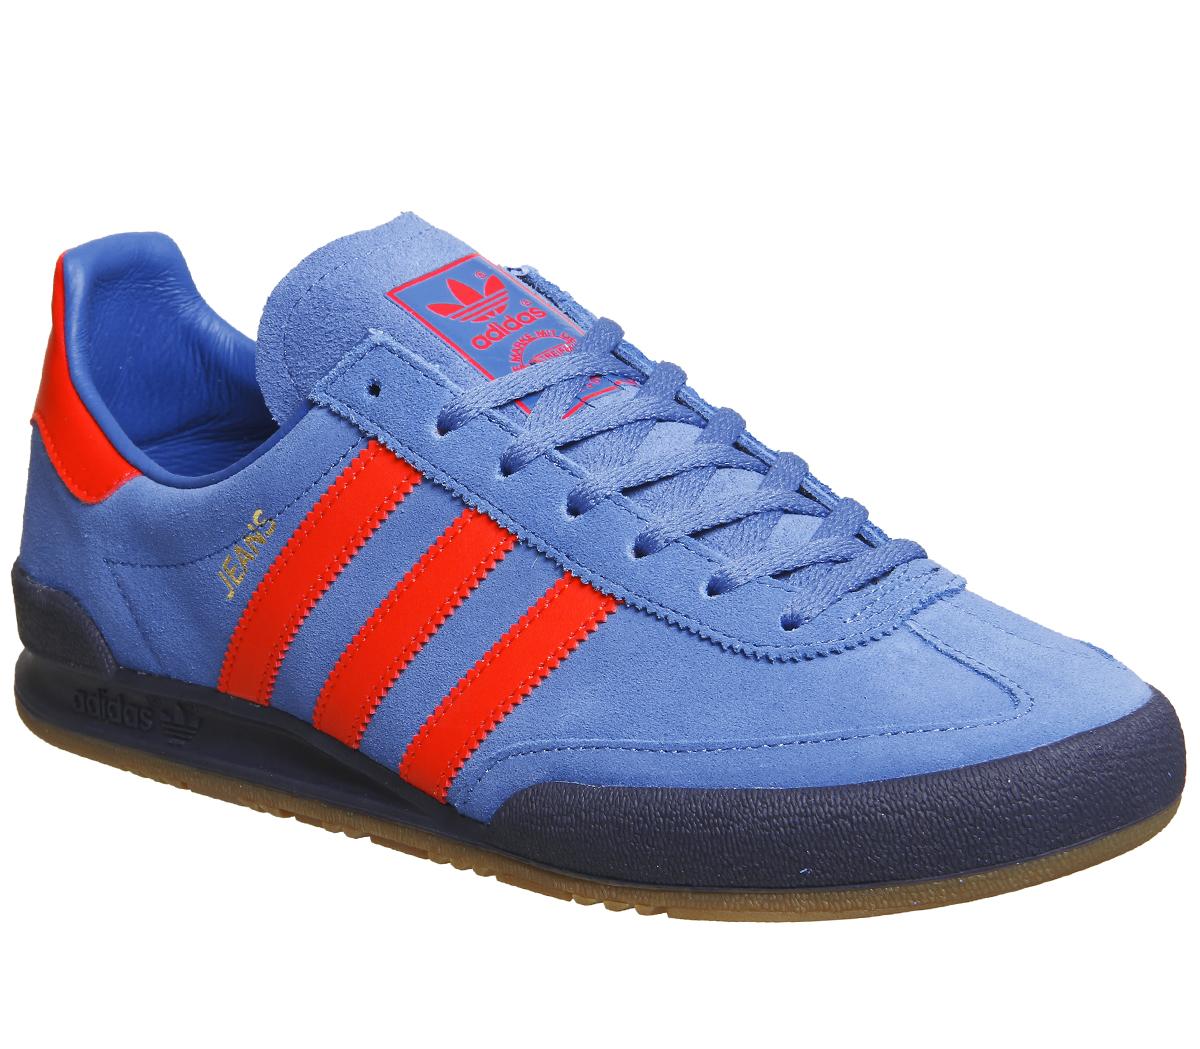 adidas jeans shoes red